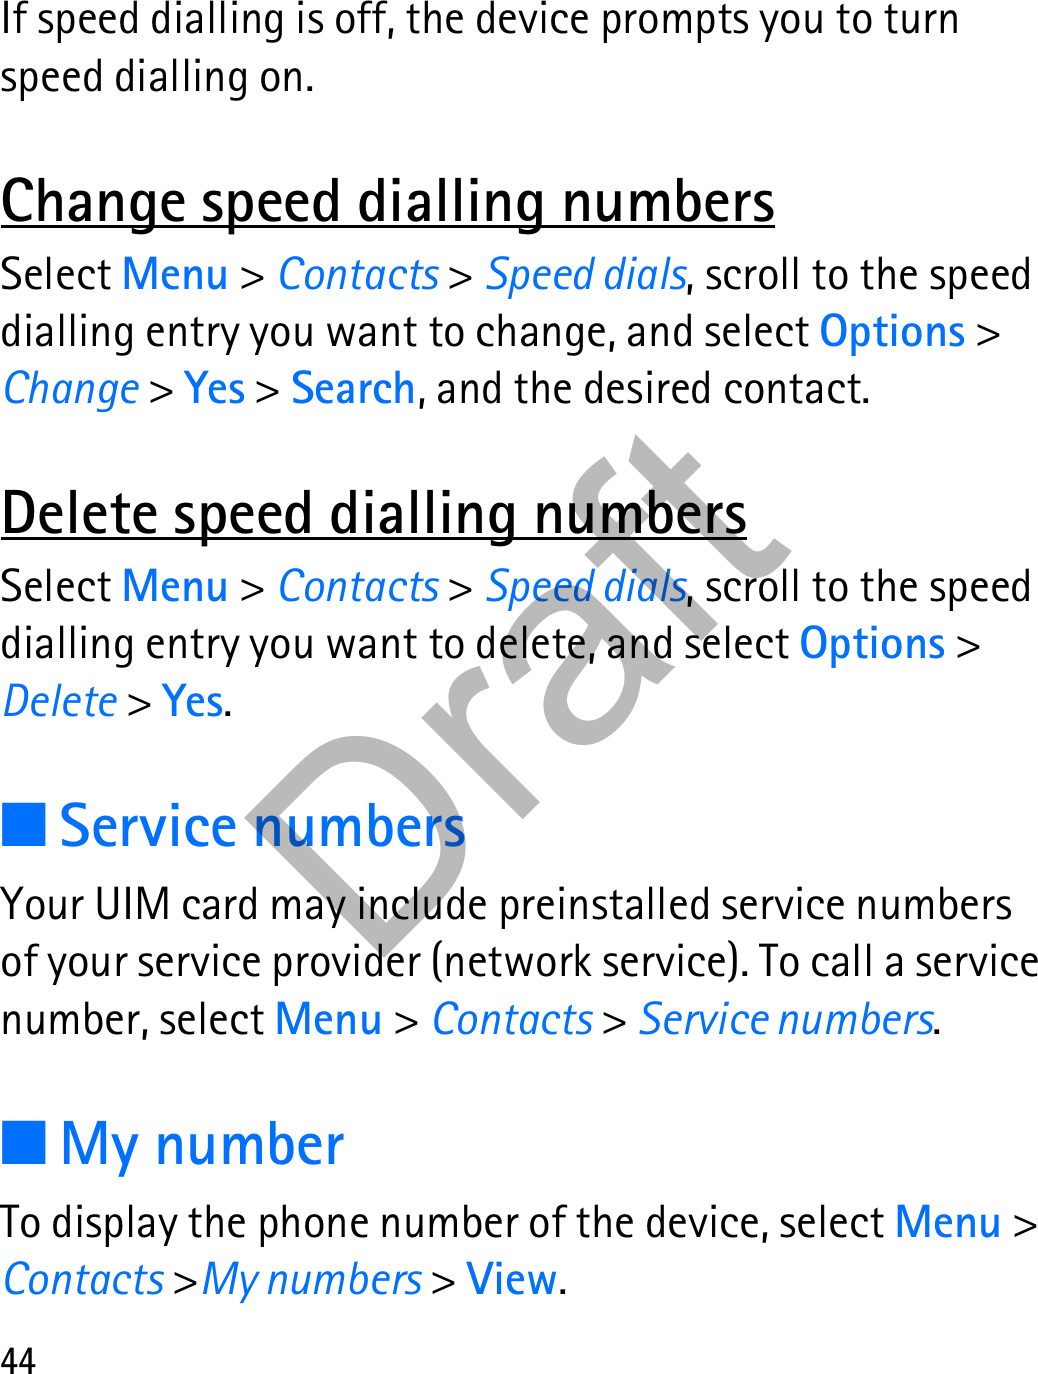 44If speed dialling is off, the device prompts you to turn speed dialling on.Change speed dialling numbersSelect Menu &gt; Contacts &gt; Speed dials, scroll to the speed dialling entry you want to change, and select Options &gt; Change &gt; Yes &gt; Search, and the desired contact.Delete speed dialling numbersSelect Menu &gt; Contacts &gt; Speed dials, scroll to the speed dialling entry you want to delete, and select Options &gt; Delete &gt; Yes.■Service numbersYour UIM card may include preinstalled service numbers of your service provider (network service). To call a service number, select Menu &gt; Contacts &gt; Service numbers.■My numberTo display the phone number of the device, select Menu &gt; Contacts &gt;My numbers &gt; View.Draft